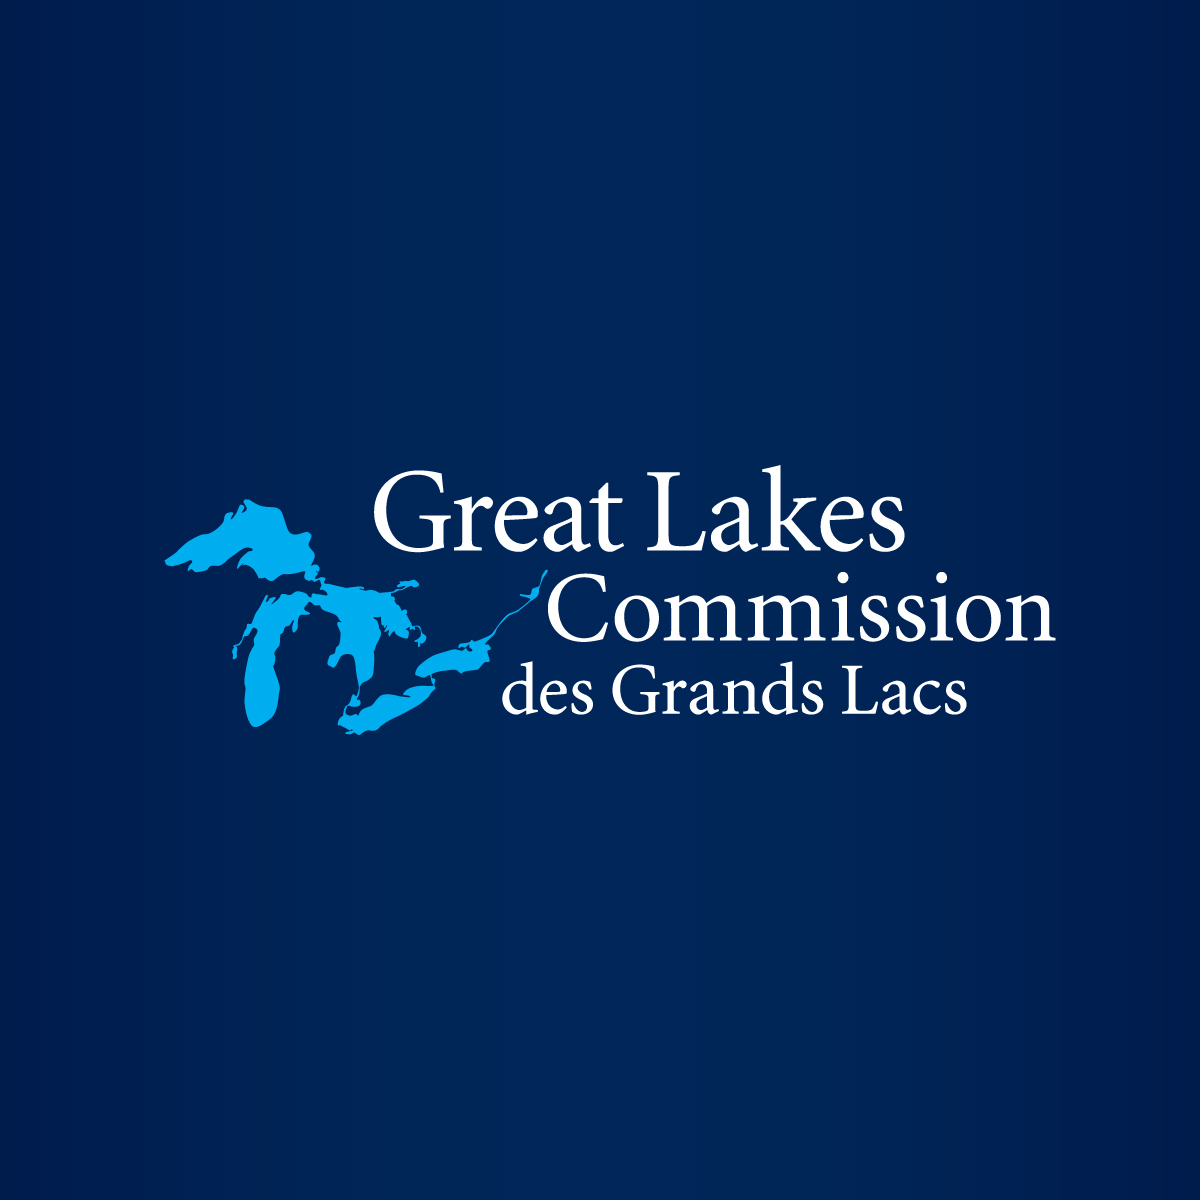 Burke proposes Great Lakes Bill of Rights